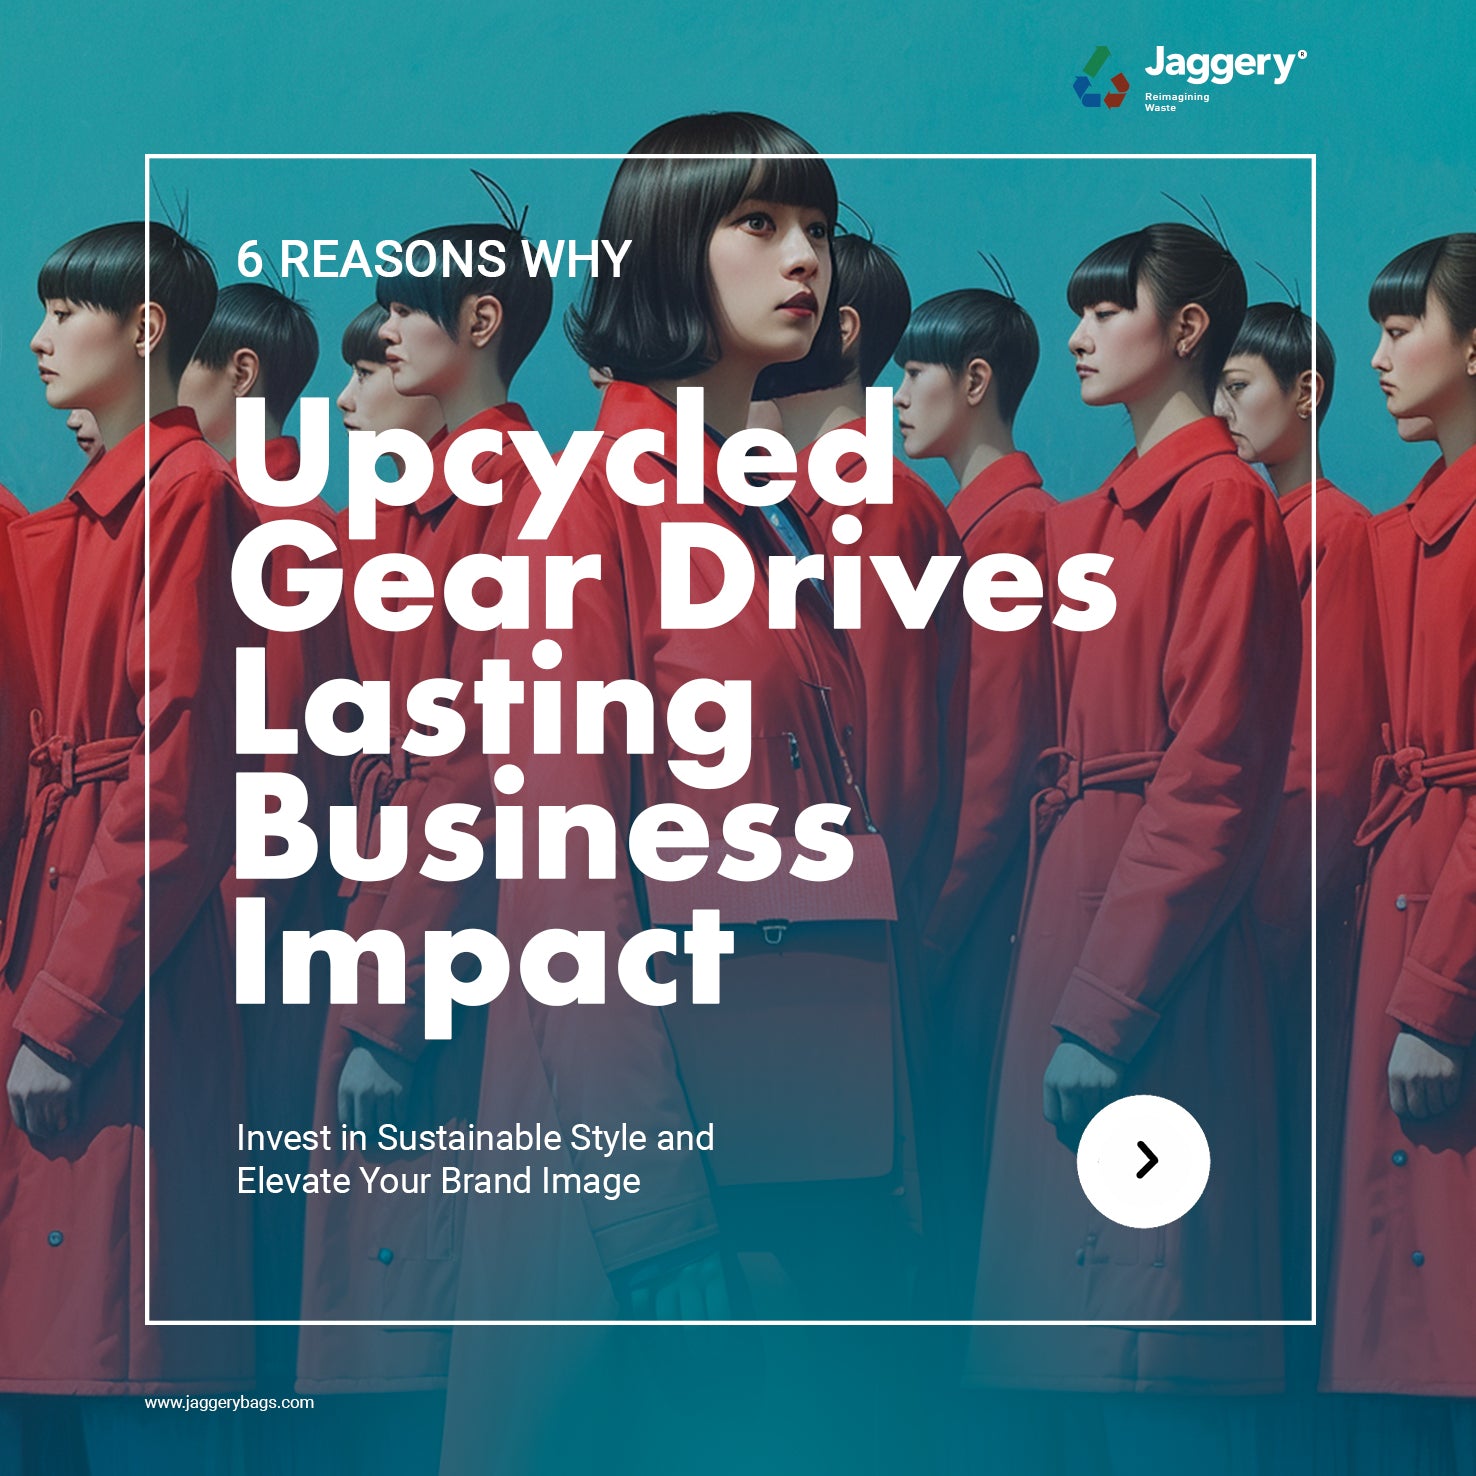 6 Reasons Why Upcycled Gear Drives Lasting Business Impact